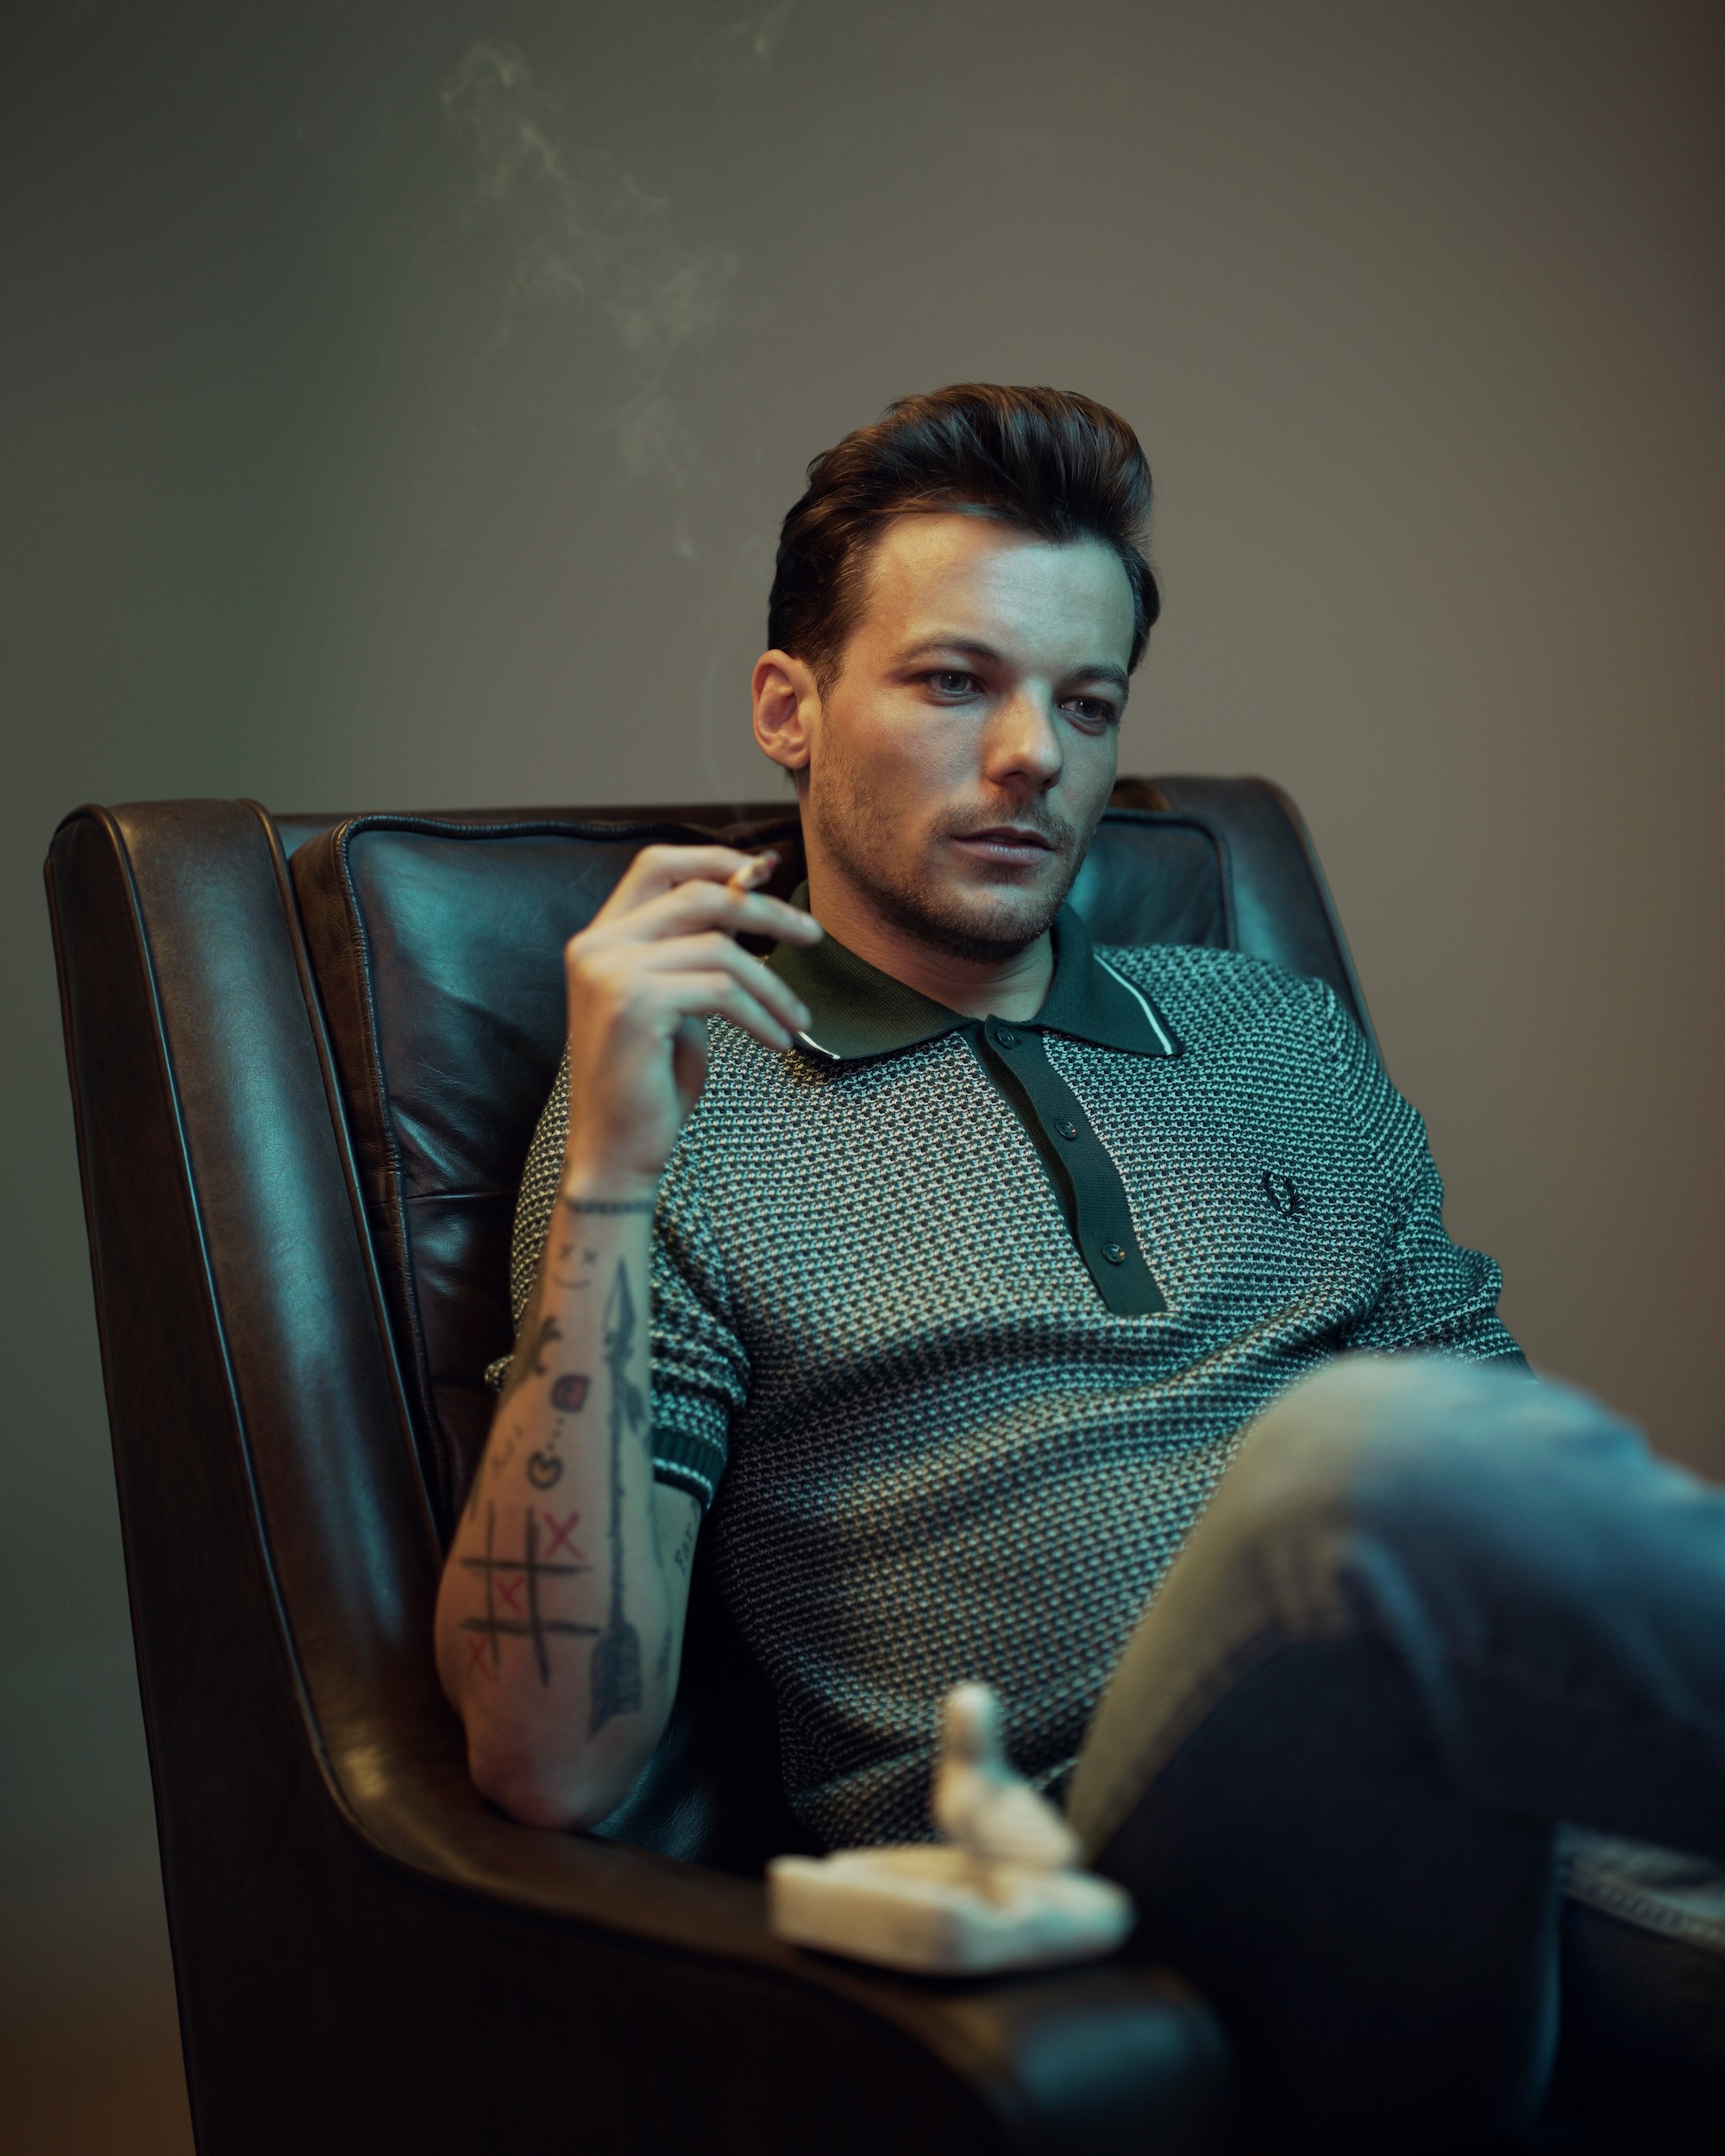 Download Louis Tomlinson With A Cigarette Wallpaper